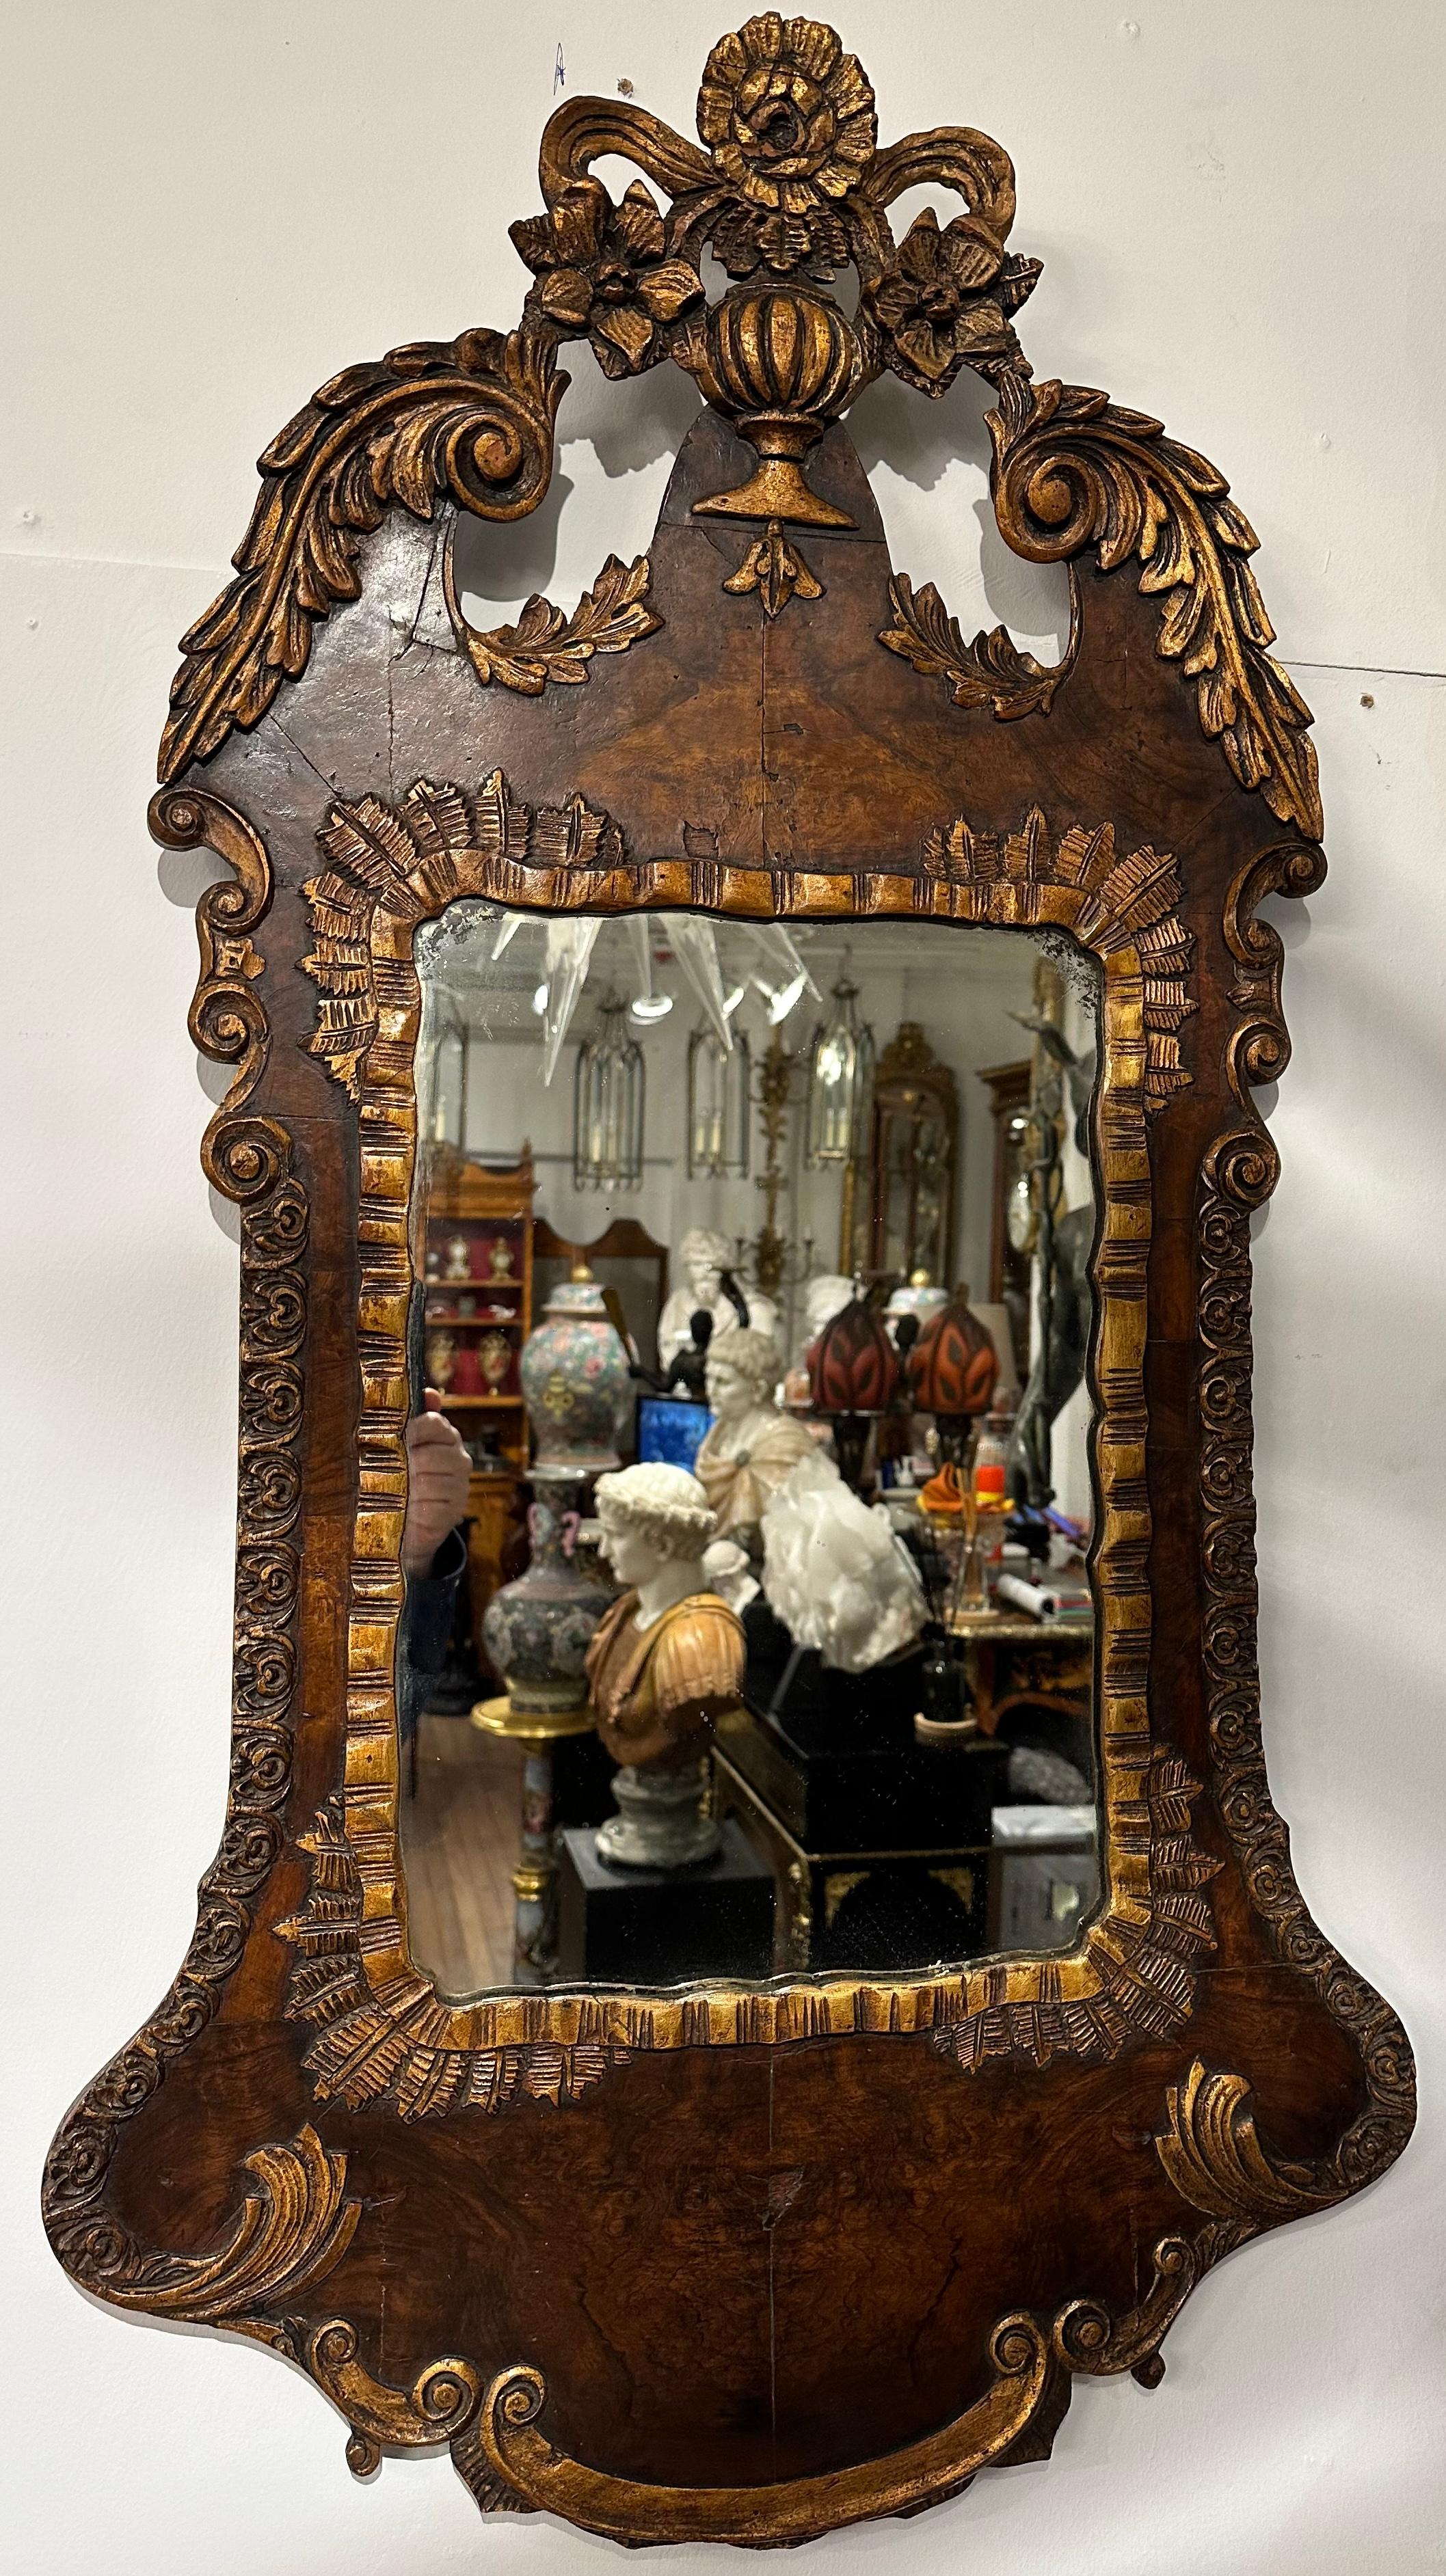 A pair of highly decorative hand carved and gilded walnut frame mirrors. Featuring a crest with floral gilded carving and elaborate ribbon gilding around the glass. These mirrors would look imposing in any setting. 